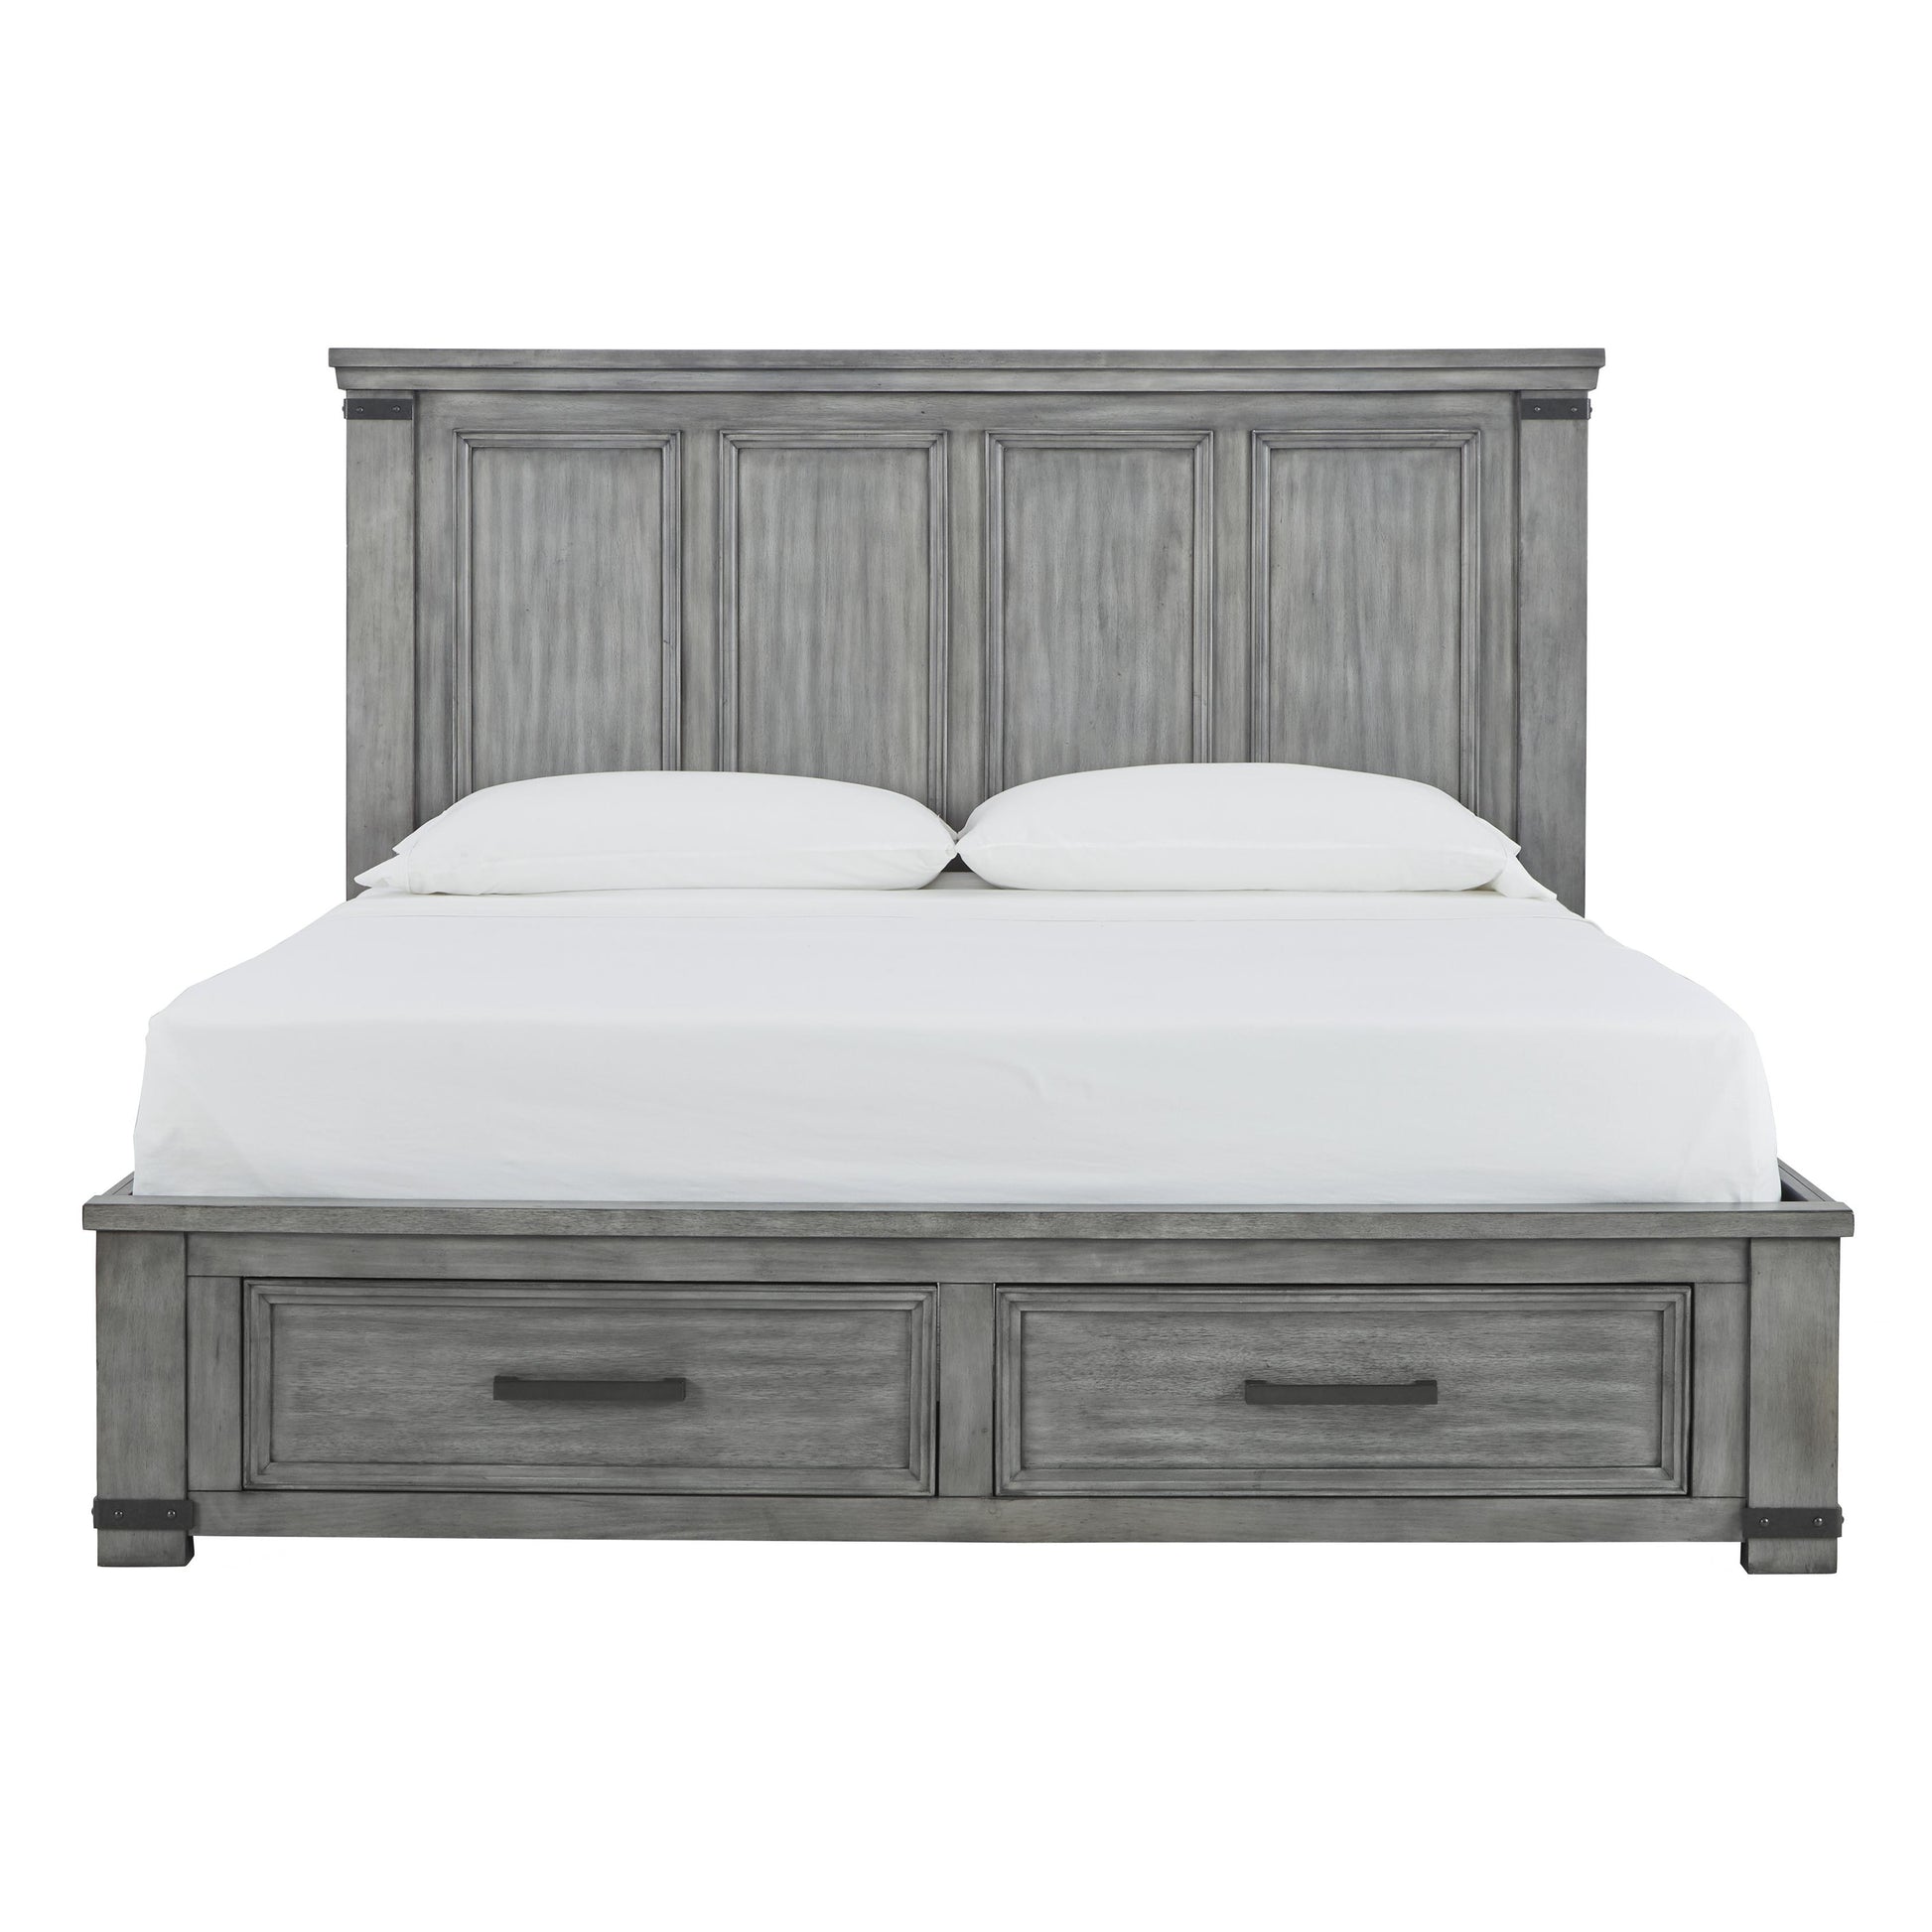 Signature Design by Ashley Russelyn California King Panel Bed with Storage B772-58/B772-56S/B772-94 IMAGE 2